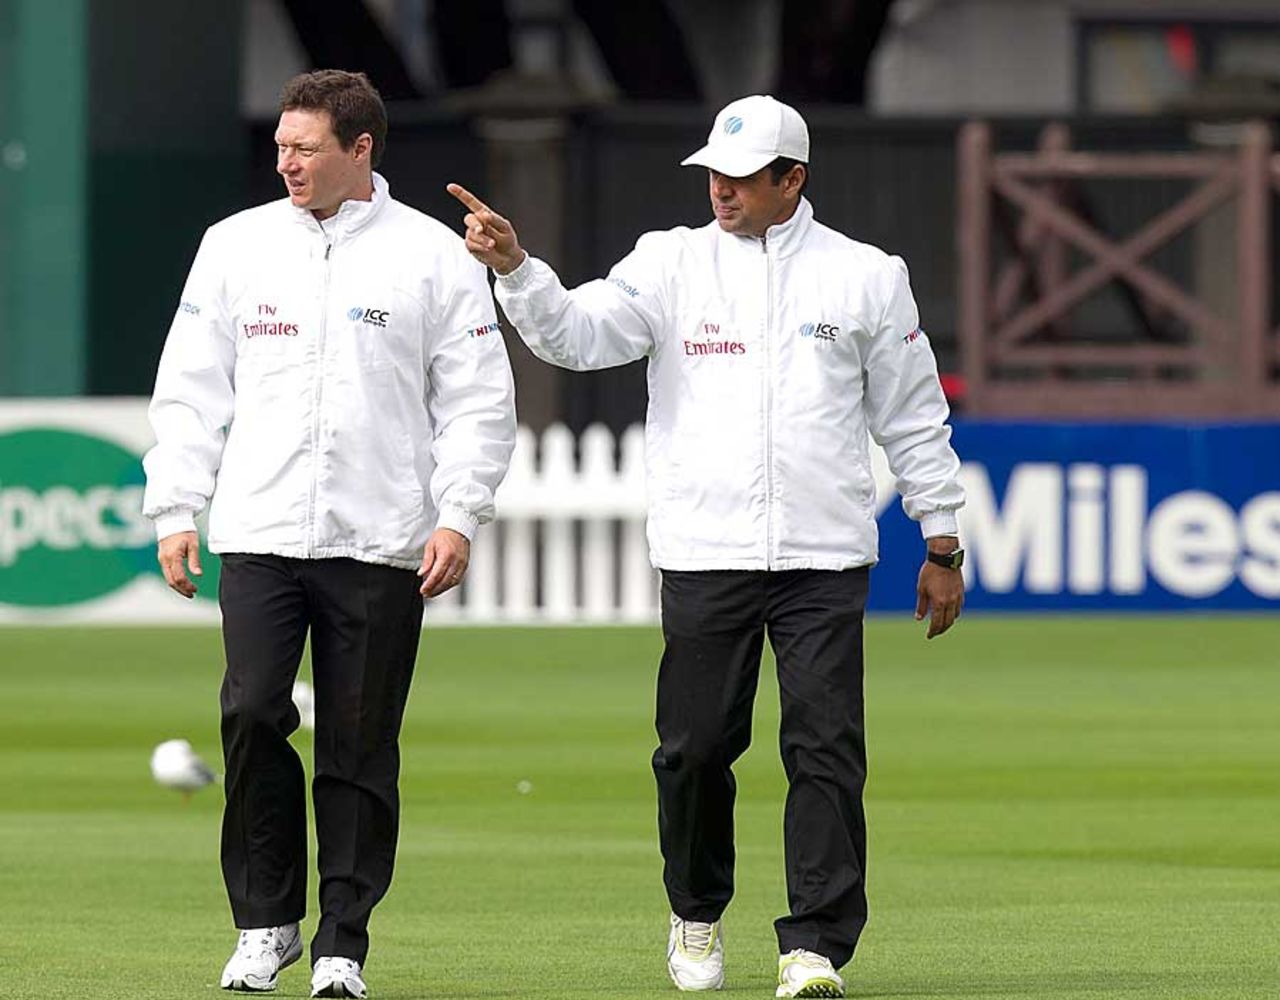 Richard Kettleborough and Aleem Dar inspect the conditions, New Zealand v South Africa, 3rd Test, Wellington, 1st day, March 23, 2012